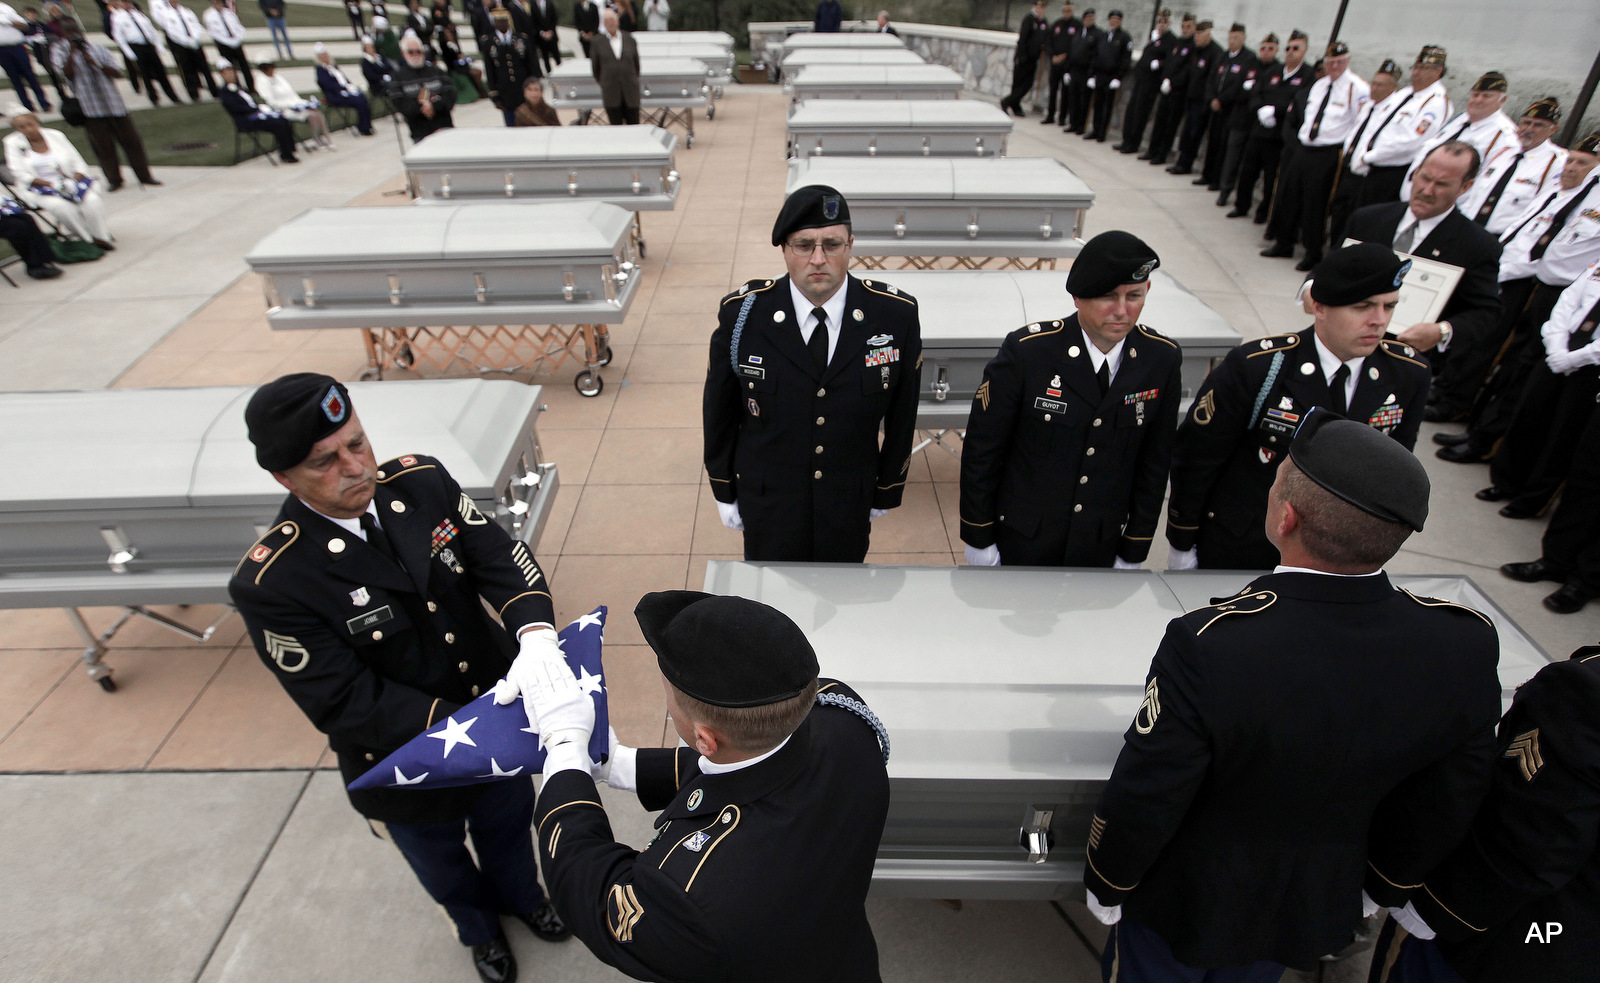 An Army honor guard prepare a folded a flag at a memorial service for veterans whose remains went unclaimed at a Detroit morgue.